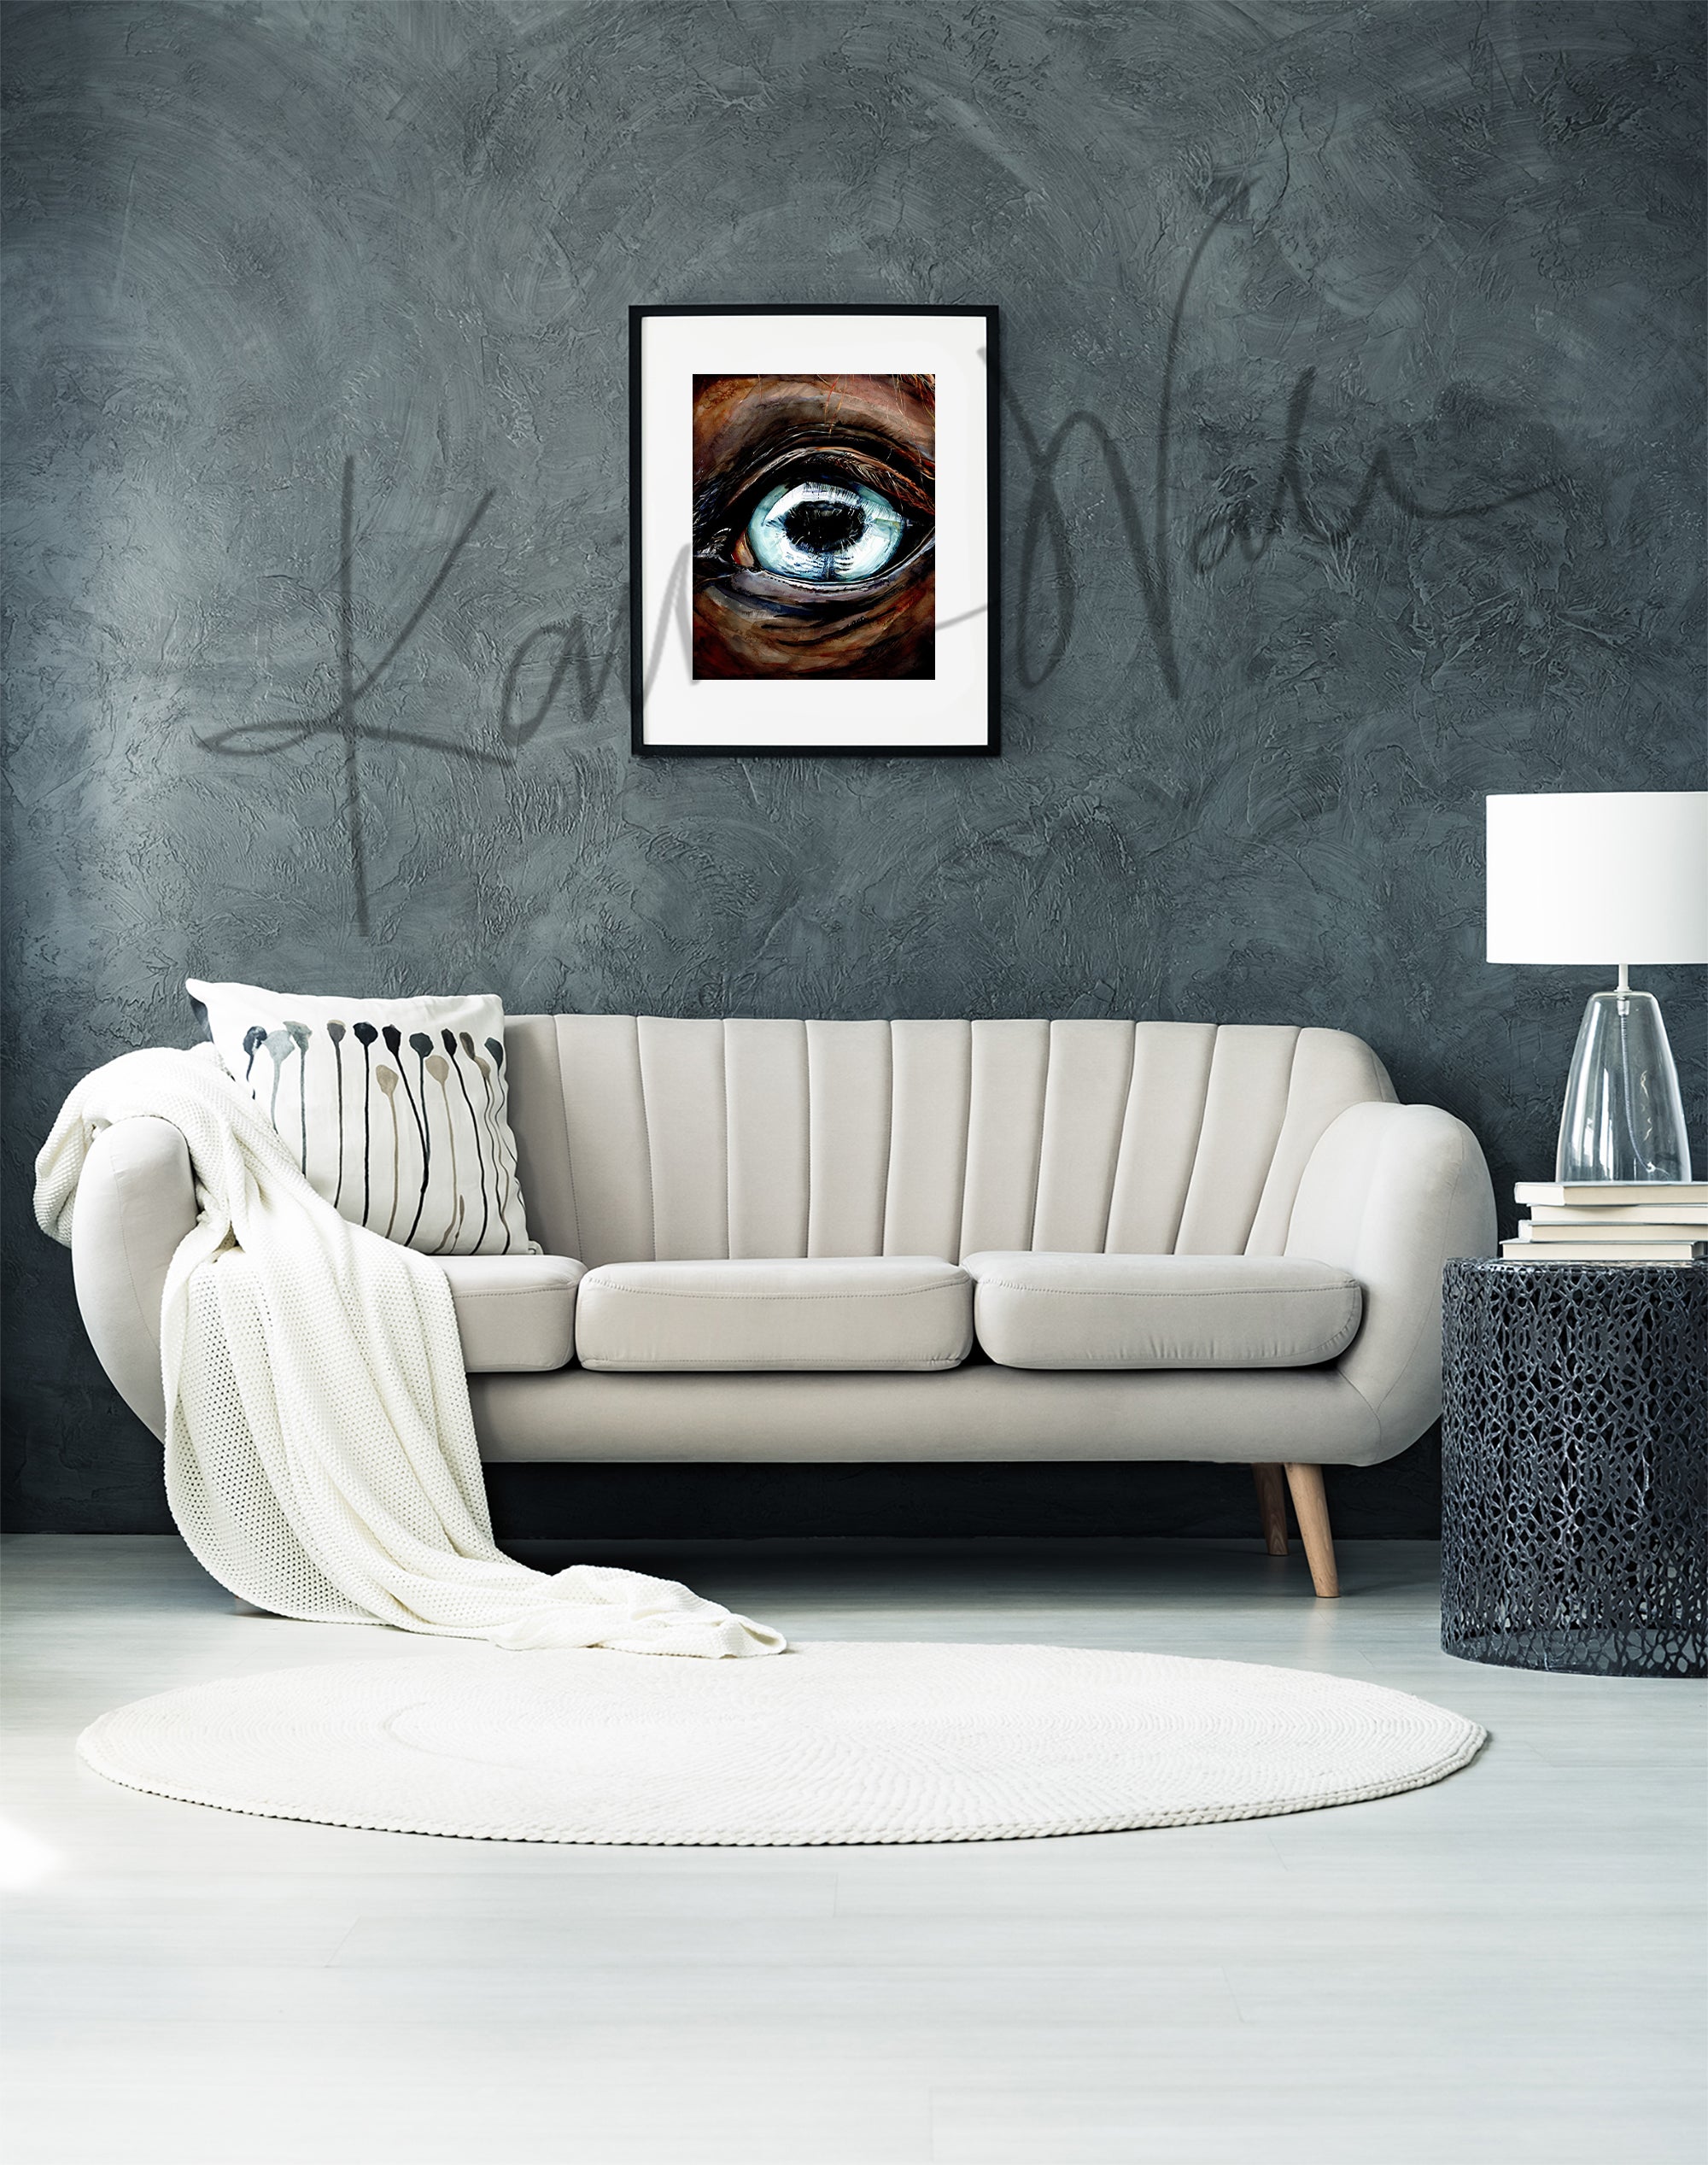 Framed watercolor painting of a zoomed in perspective of a horse eye. The iris is light blue and the horse is painted a warm brown. The painting is hanging over a beige couch.